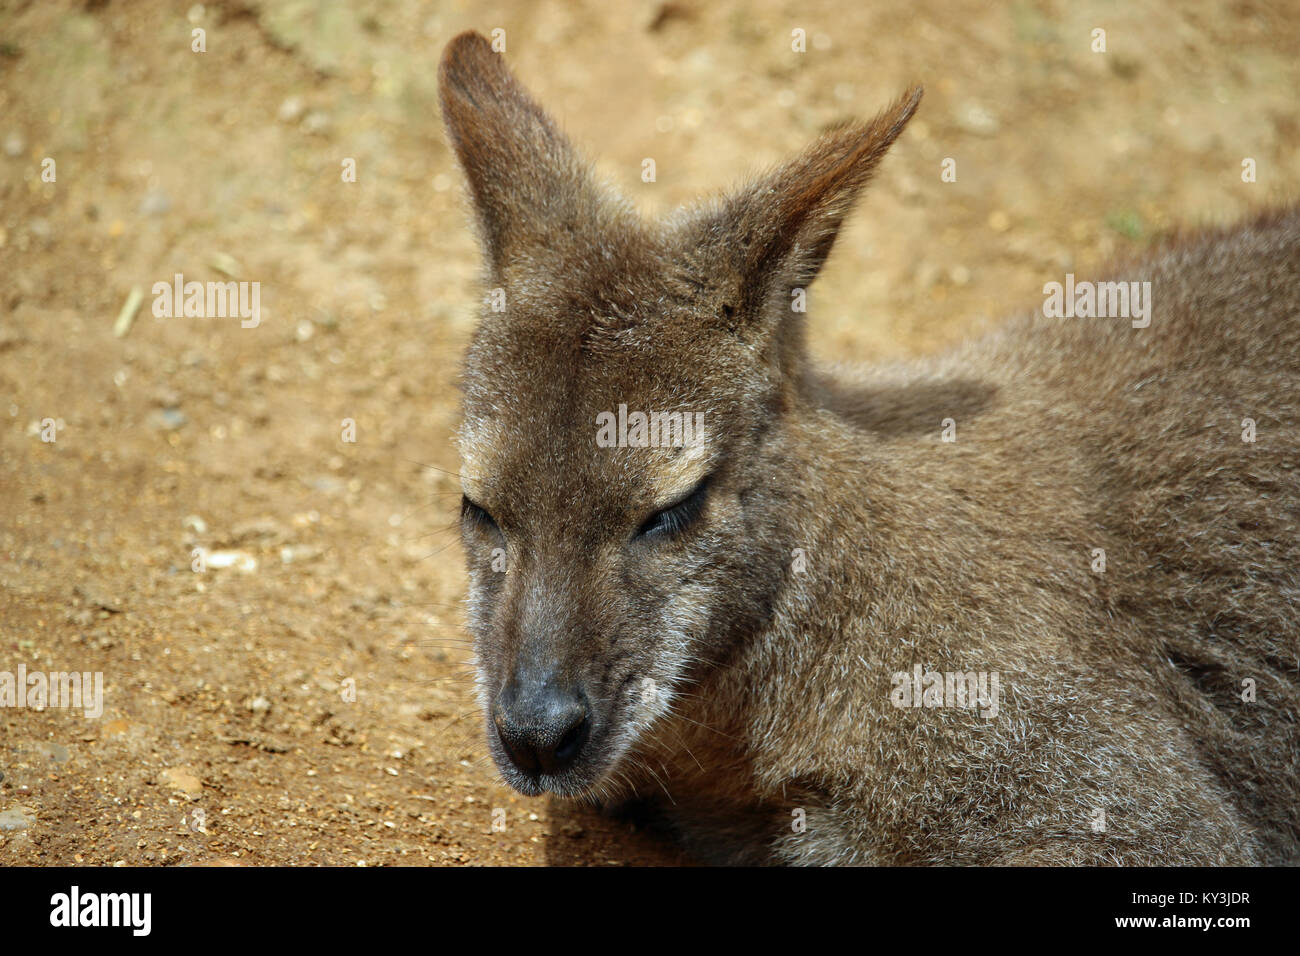 Head and shoulders of a red-necked wallaby (Macropus rufogriseus) sitting dozing in the sunshine with a background of soil. Stock Photo